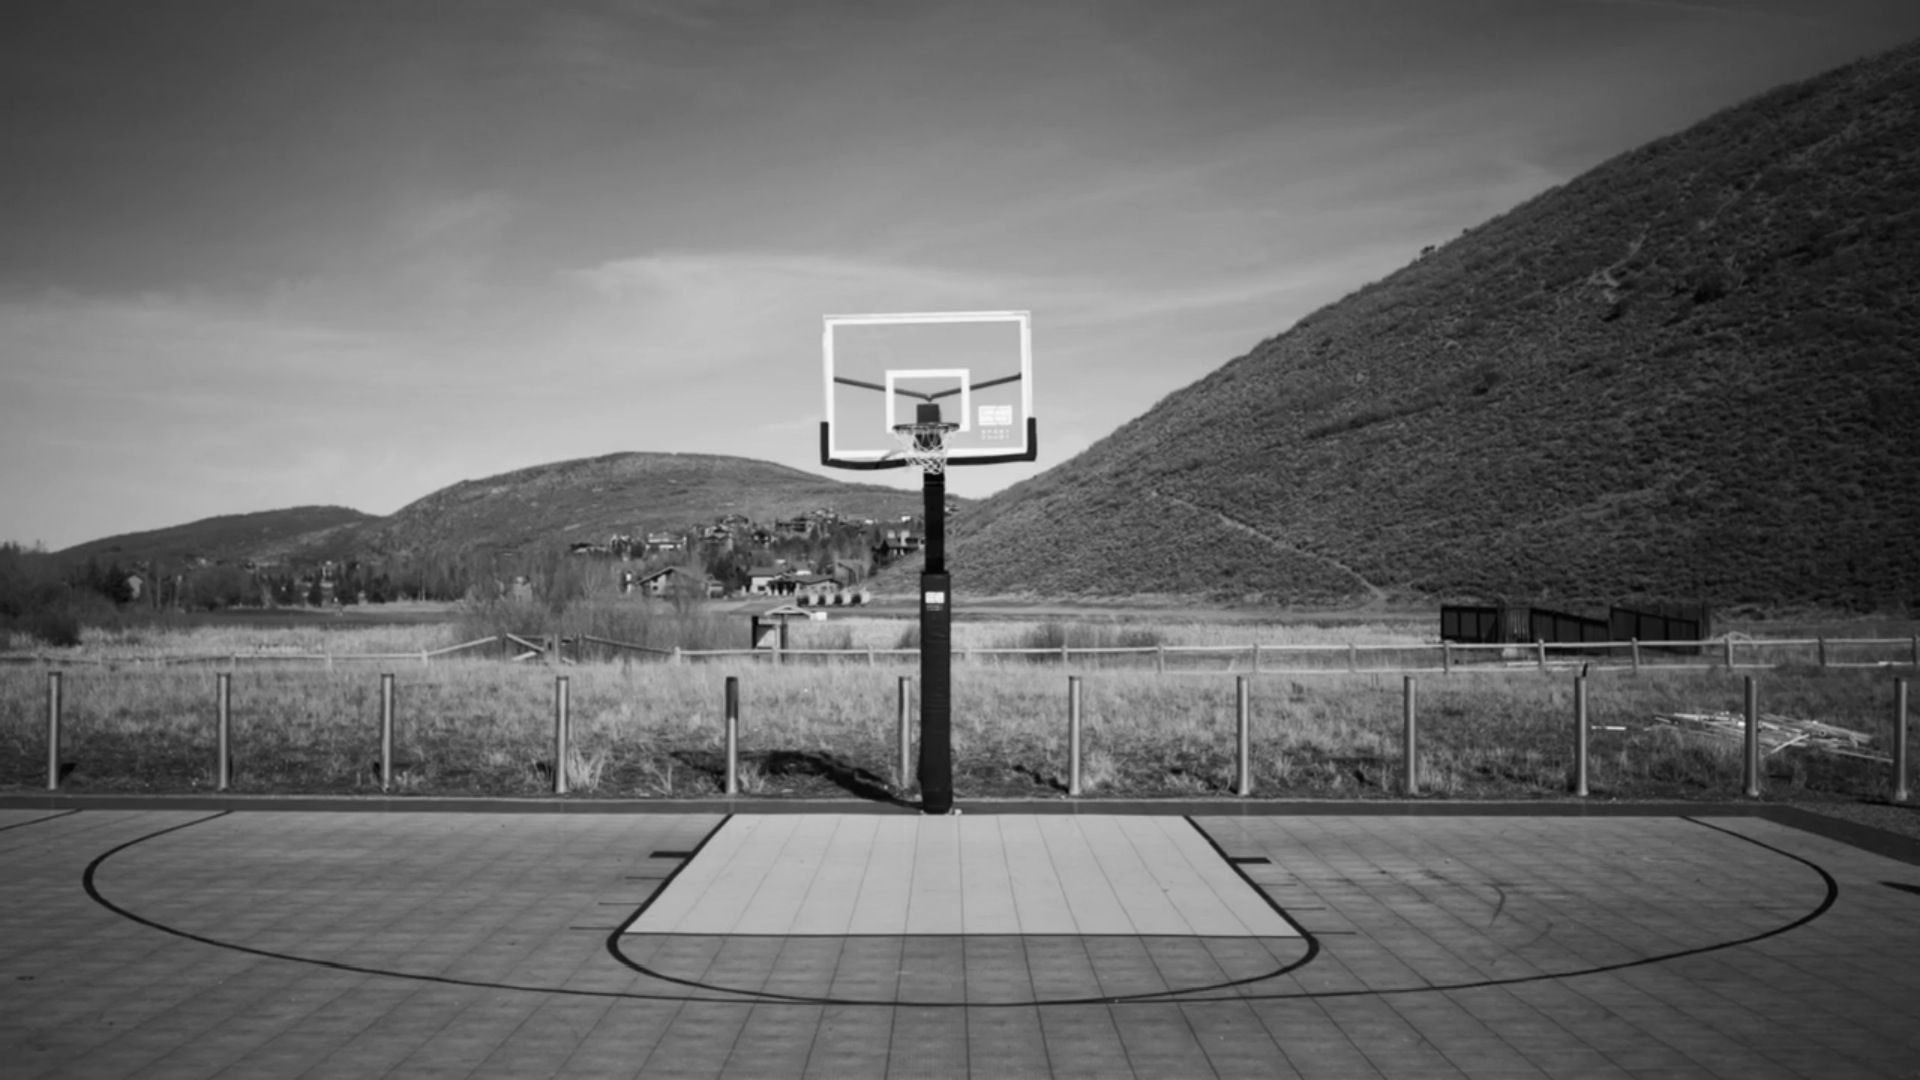 Free download Street Basketball Wallpaper Image amp Picture Becuo [1920x1080] for your Desktop, Mobile & Tablet. Explore Basketball Court Wallpaper. HD Basketball Wallpaper, Basketball Court Wallpaper HD